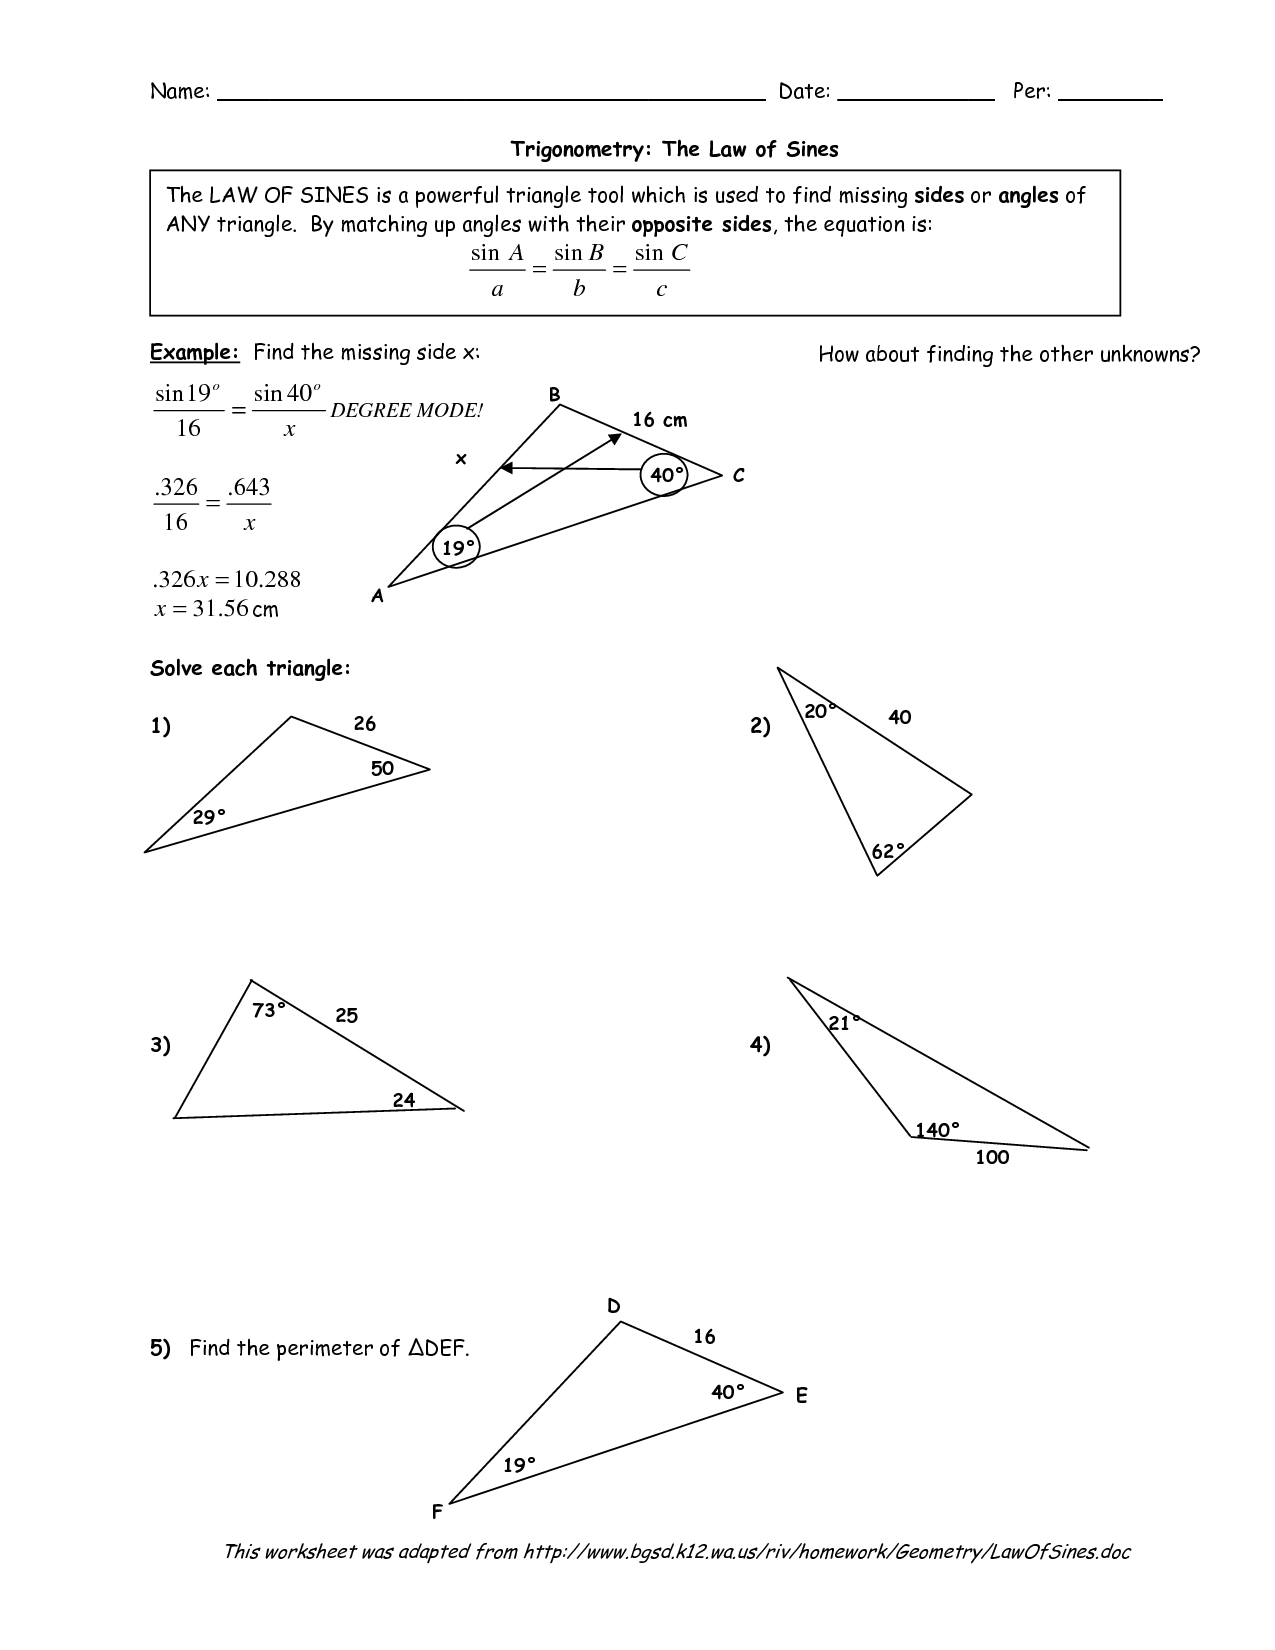 law-of-sines-and-law-of-cosines-worksheet-answers-law-of-sines-and-cosines-worksheet-with-key